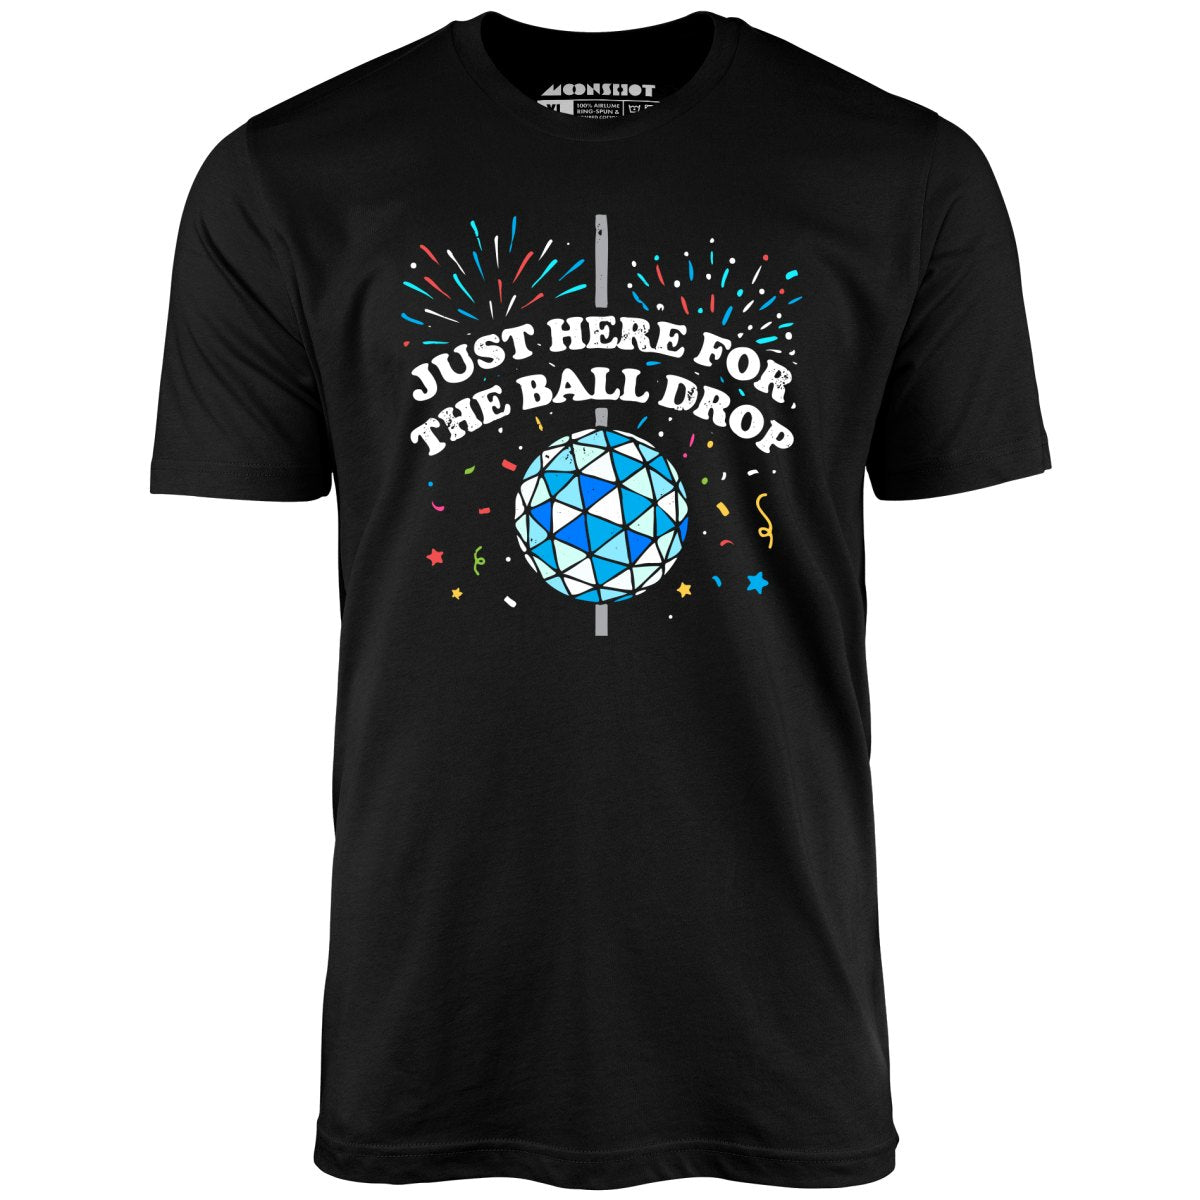 Just Here for The Ball Drop - Unisex T-Shirt